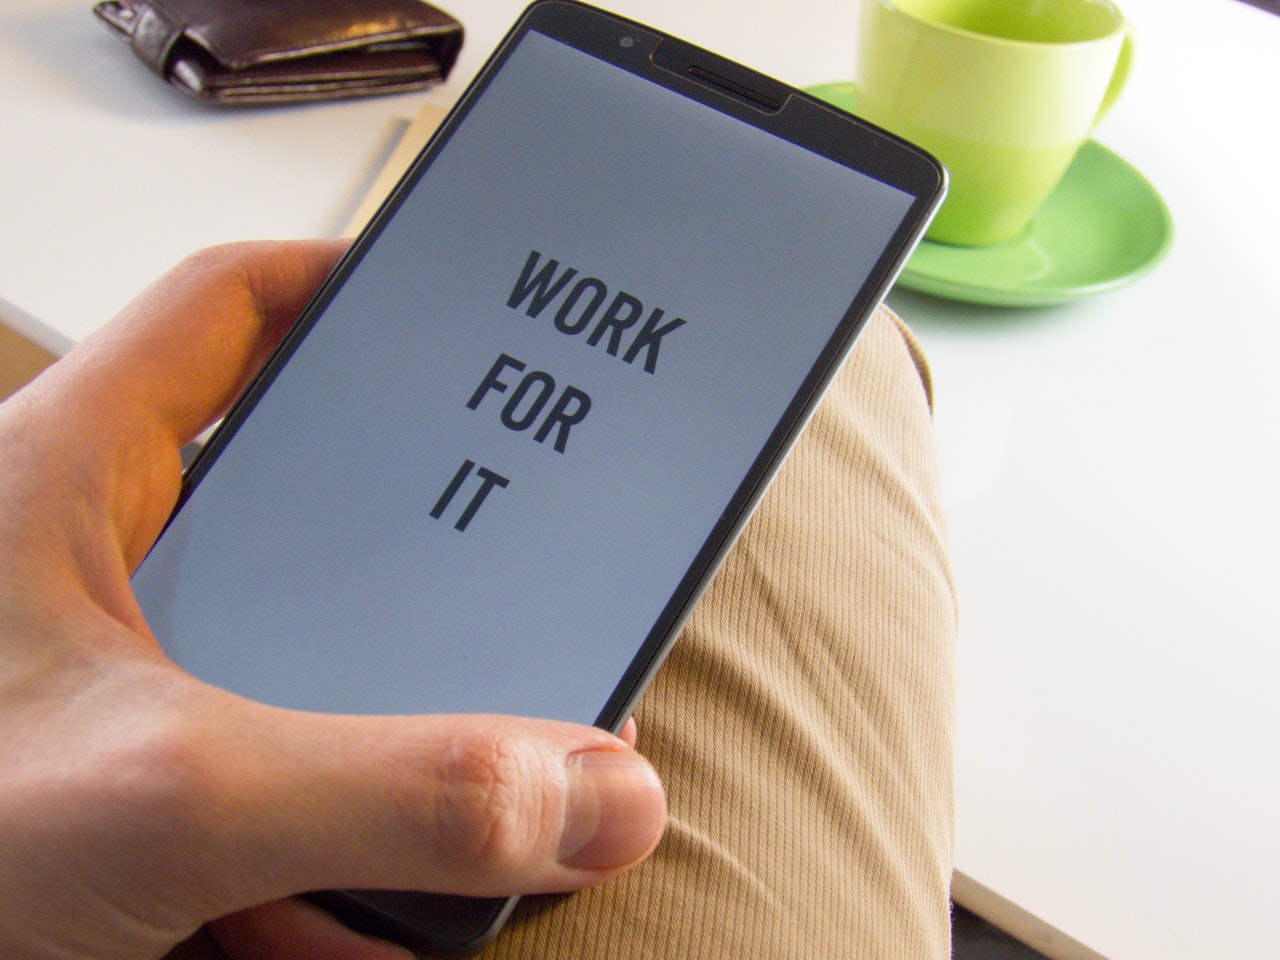 Cell phone with text "WORK FOR IT"